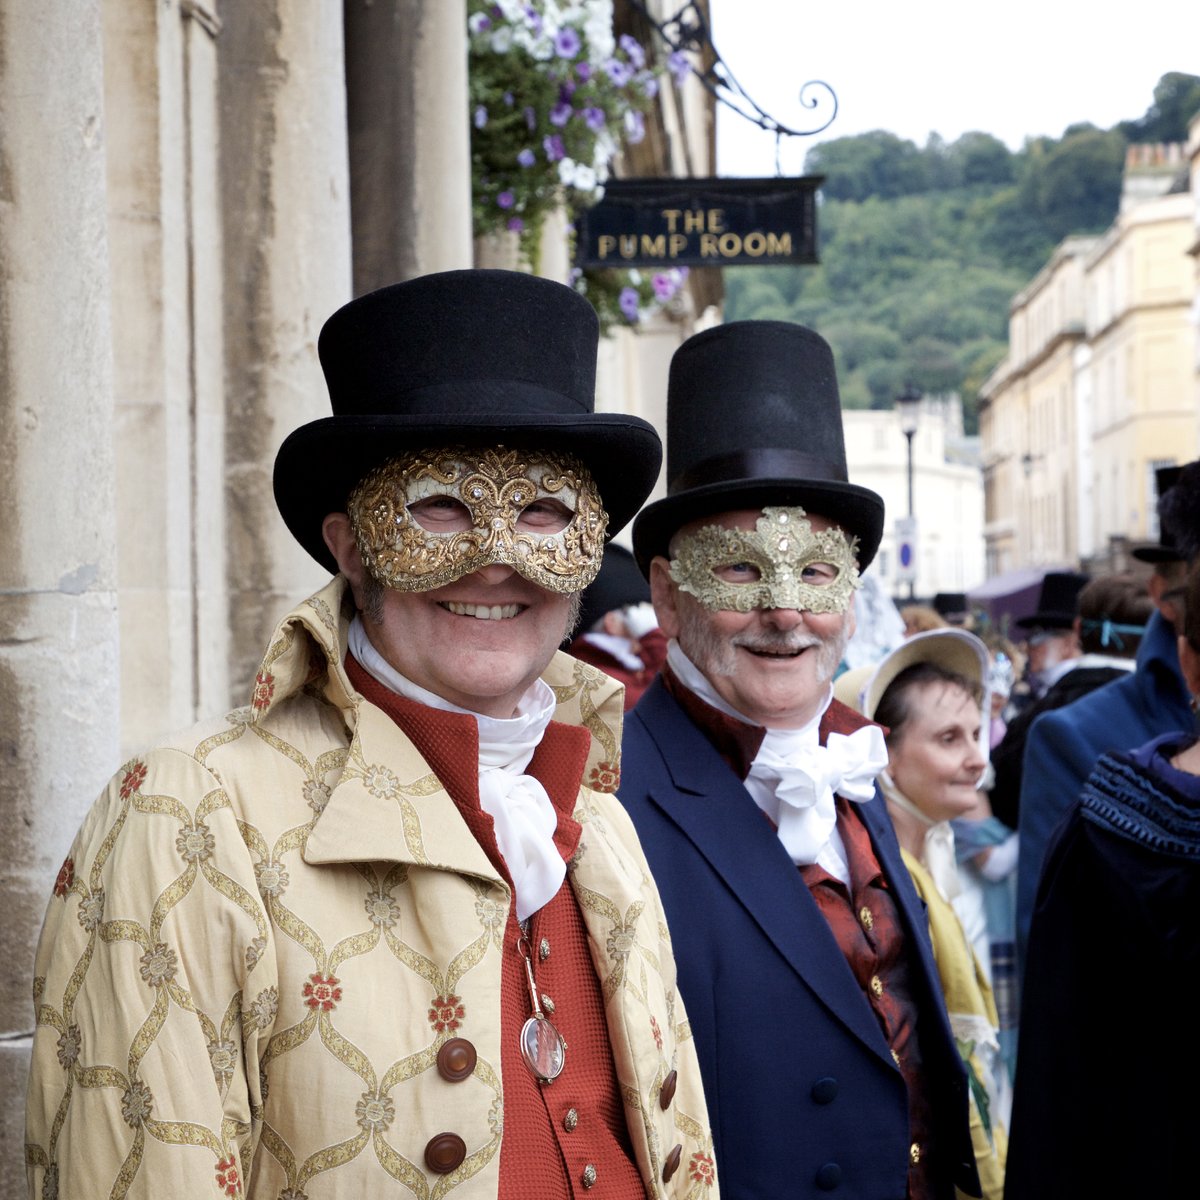 8 - 17 September, Bath will be all Austentatious. The books, bonnets, Regency balls, plus talks, tours, promenades, theatrical performances, discussions, hair-and-costume-based events and, well, everything Austen. Bath at its best: soak it all up, then stay and sleep it all off.